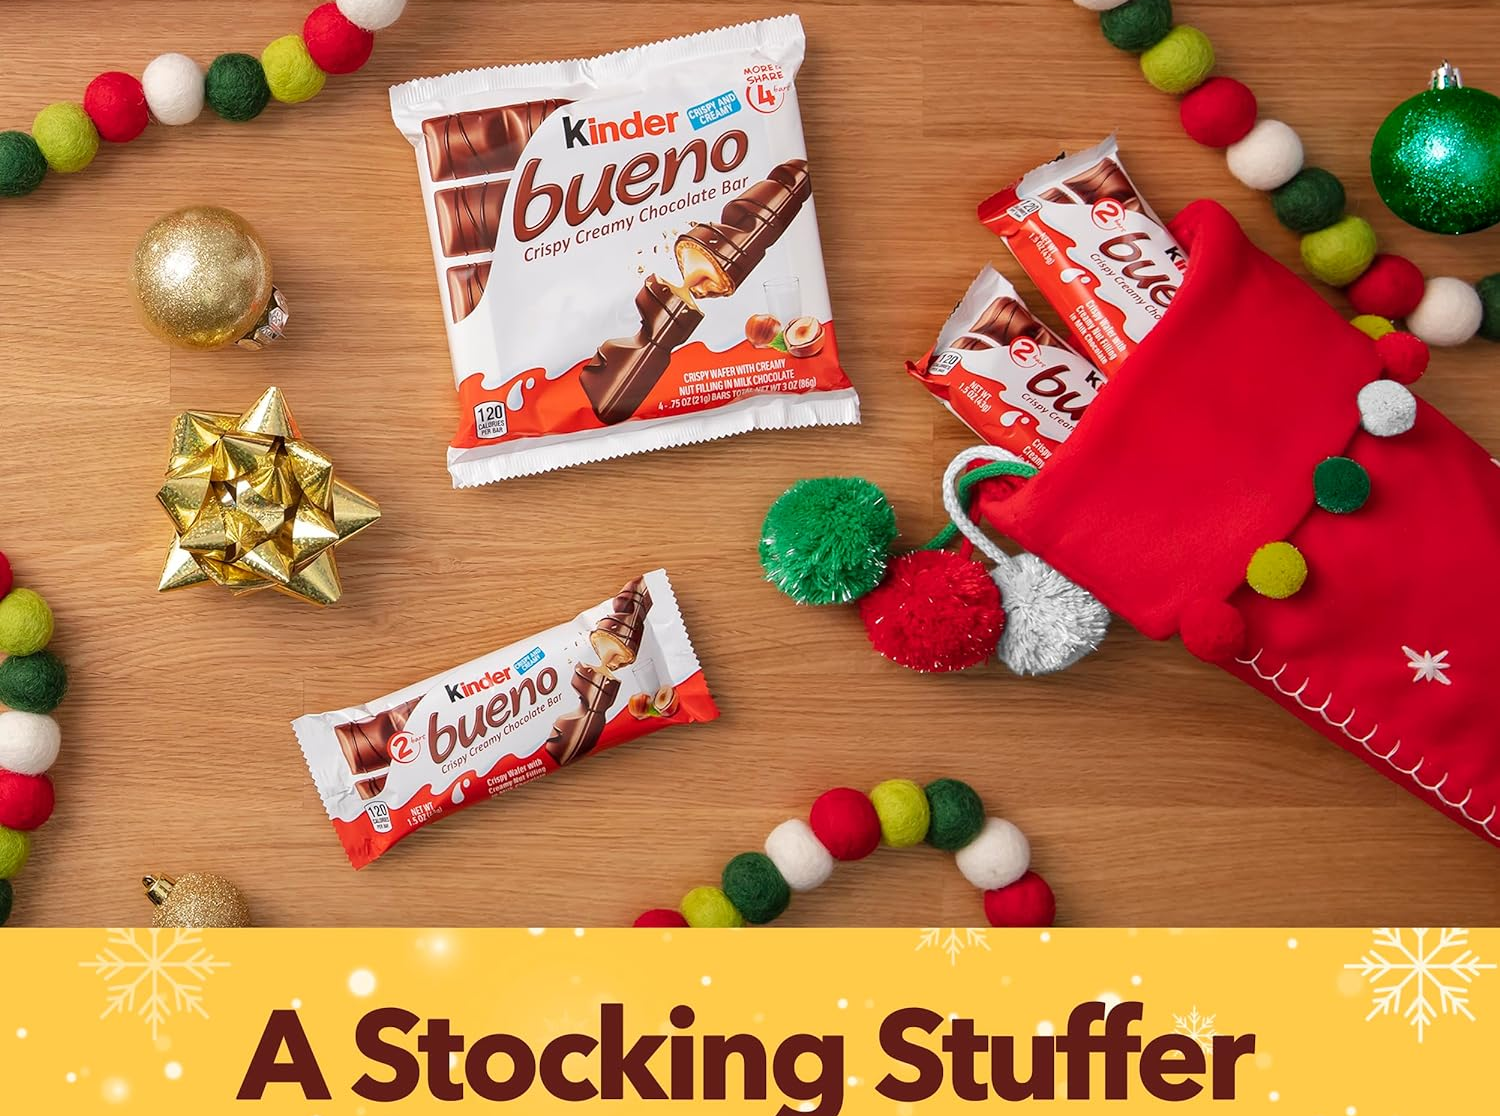  Christmas Stocking Stuffers, 8pc Stocking Stuffers for Teens,  Kids, Adults, Women, Best Stocking Stuffer Ideas, Mens Stocking Stuffers  with Gingerbread Bath Bomb, Candy Cane Soap, Calendar & More : Beauty